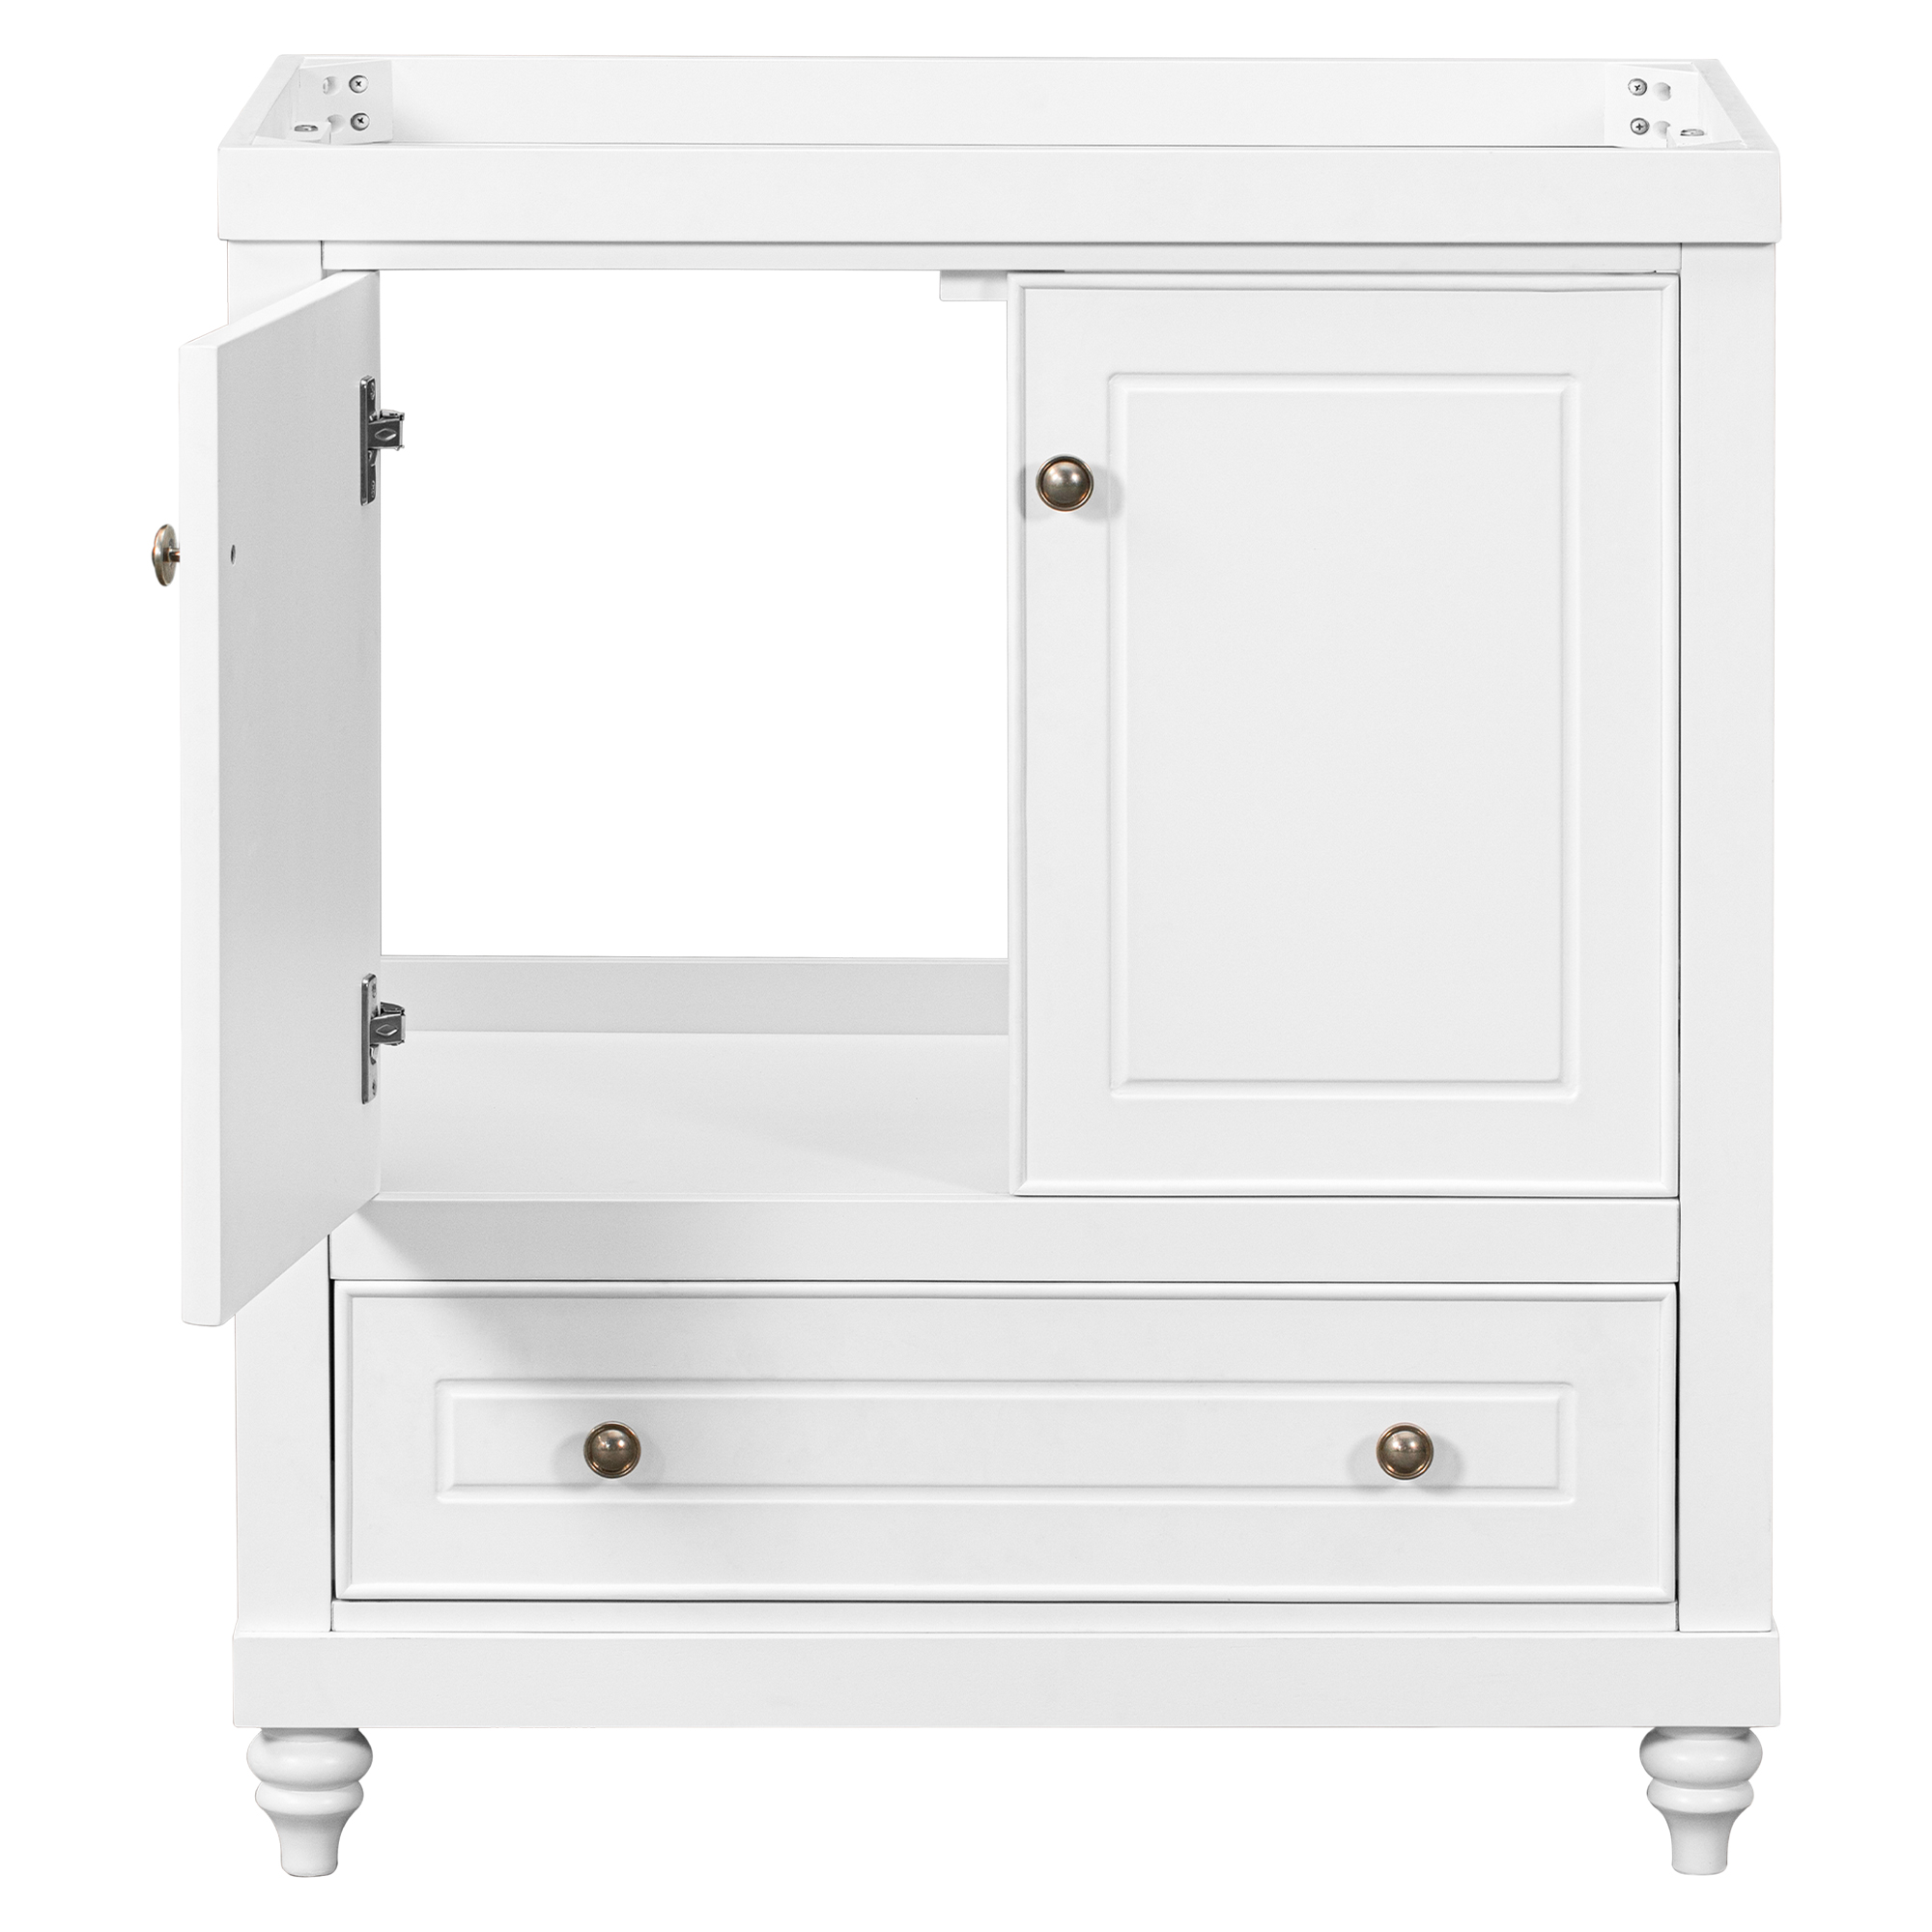 30 Inches Bathroom Vanity without Sink - WF296704AAK